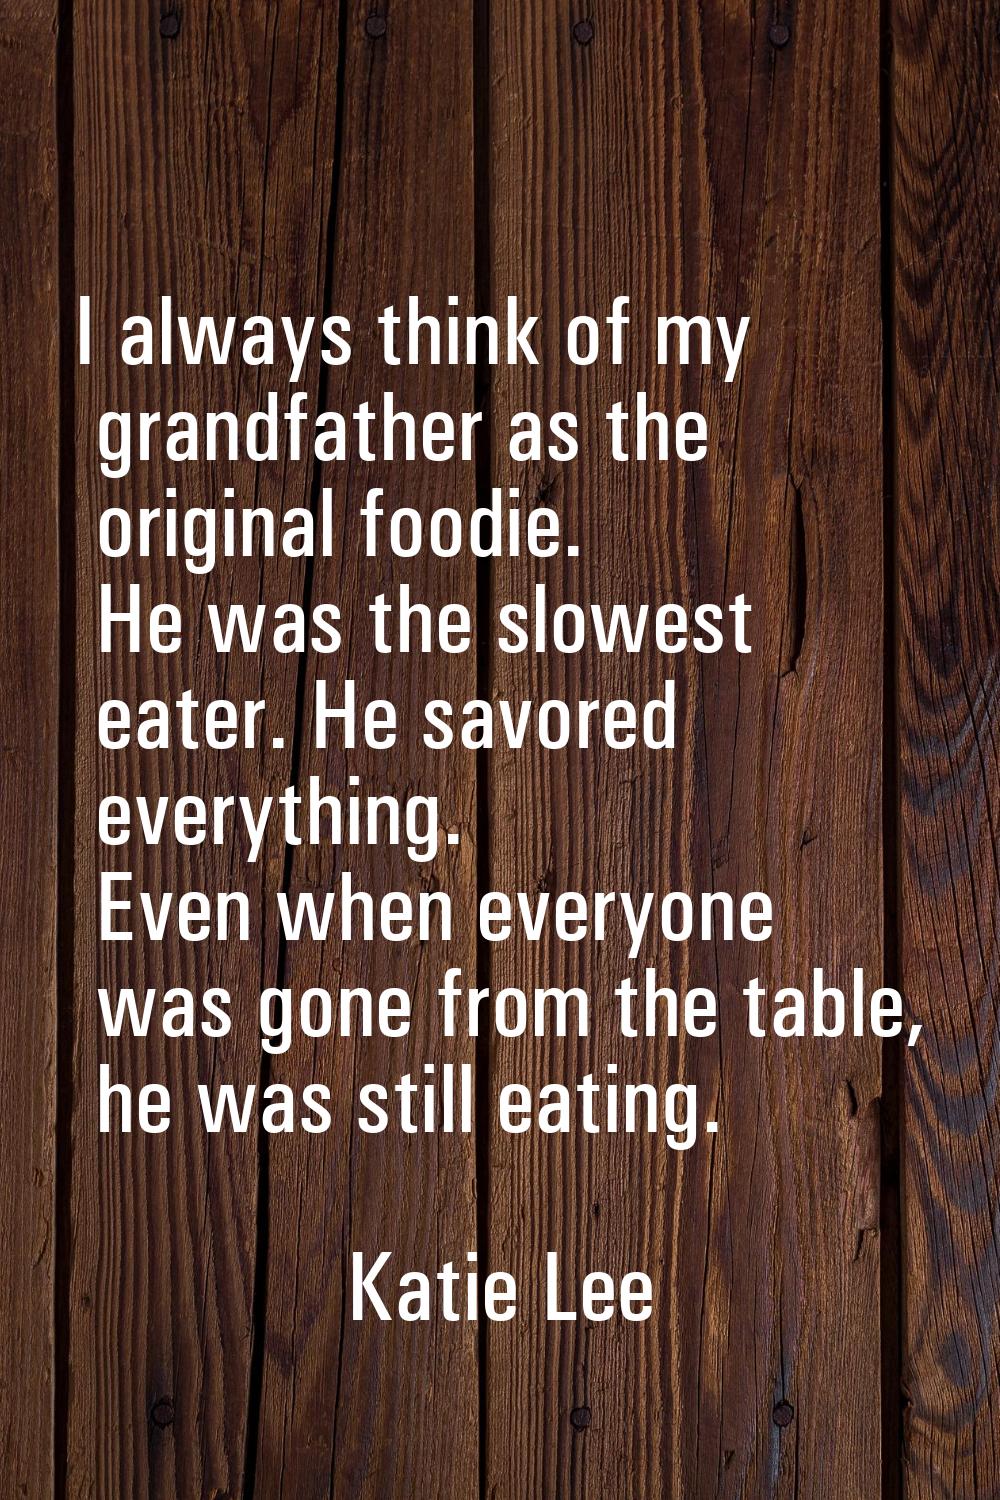 I always think of my grandfather as the original foodie. He was the slowest eater. He savored every